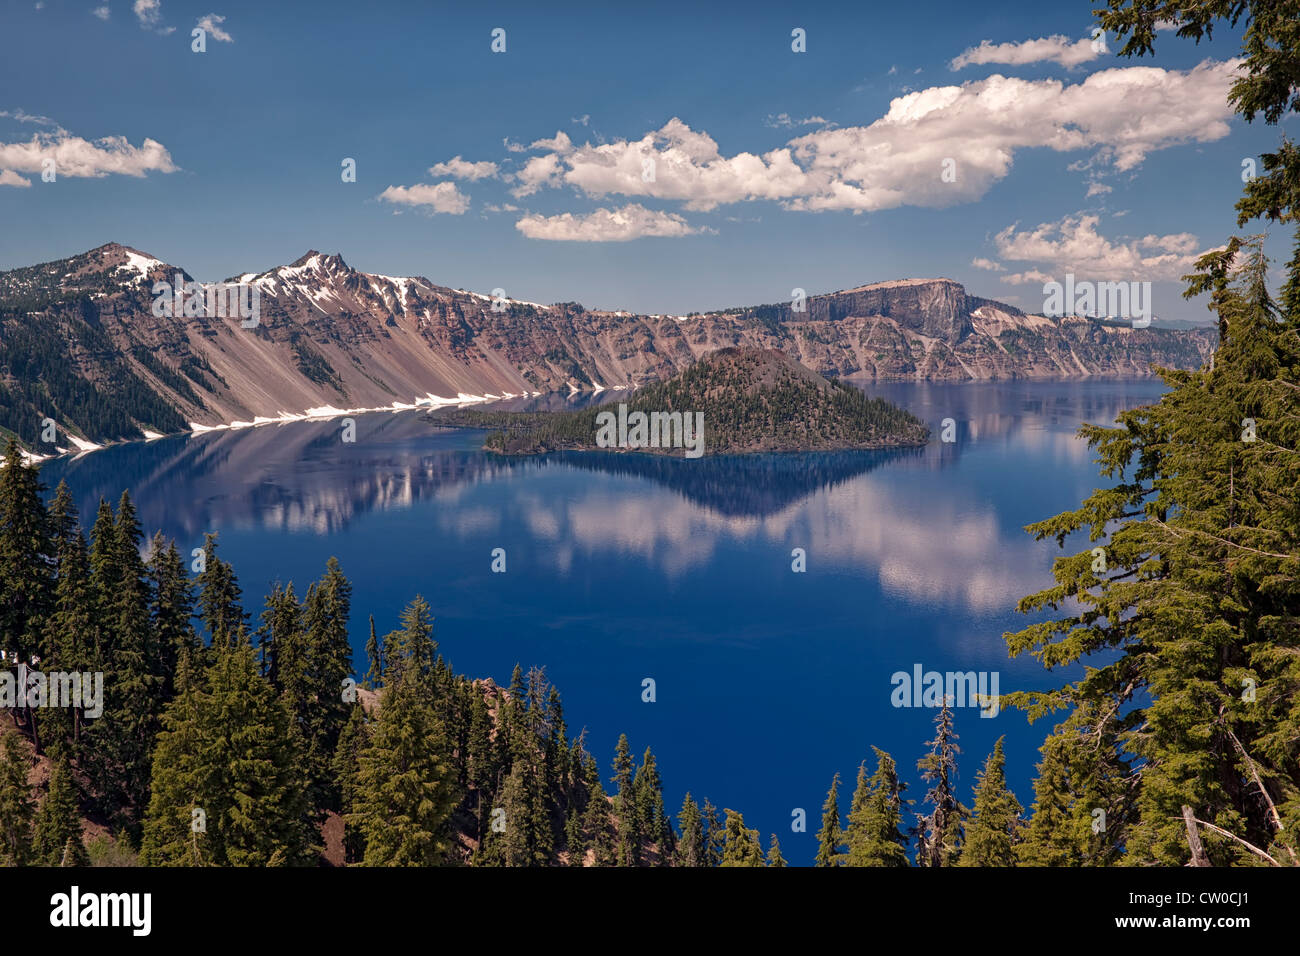 Afternoon clouds and Wizard Island reflect in the calm water of Oregon’s Crater Lake National Park. Stock Photo